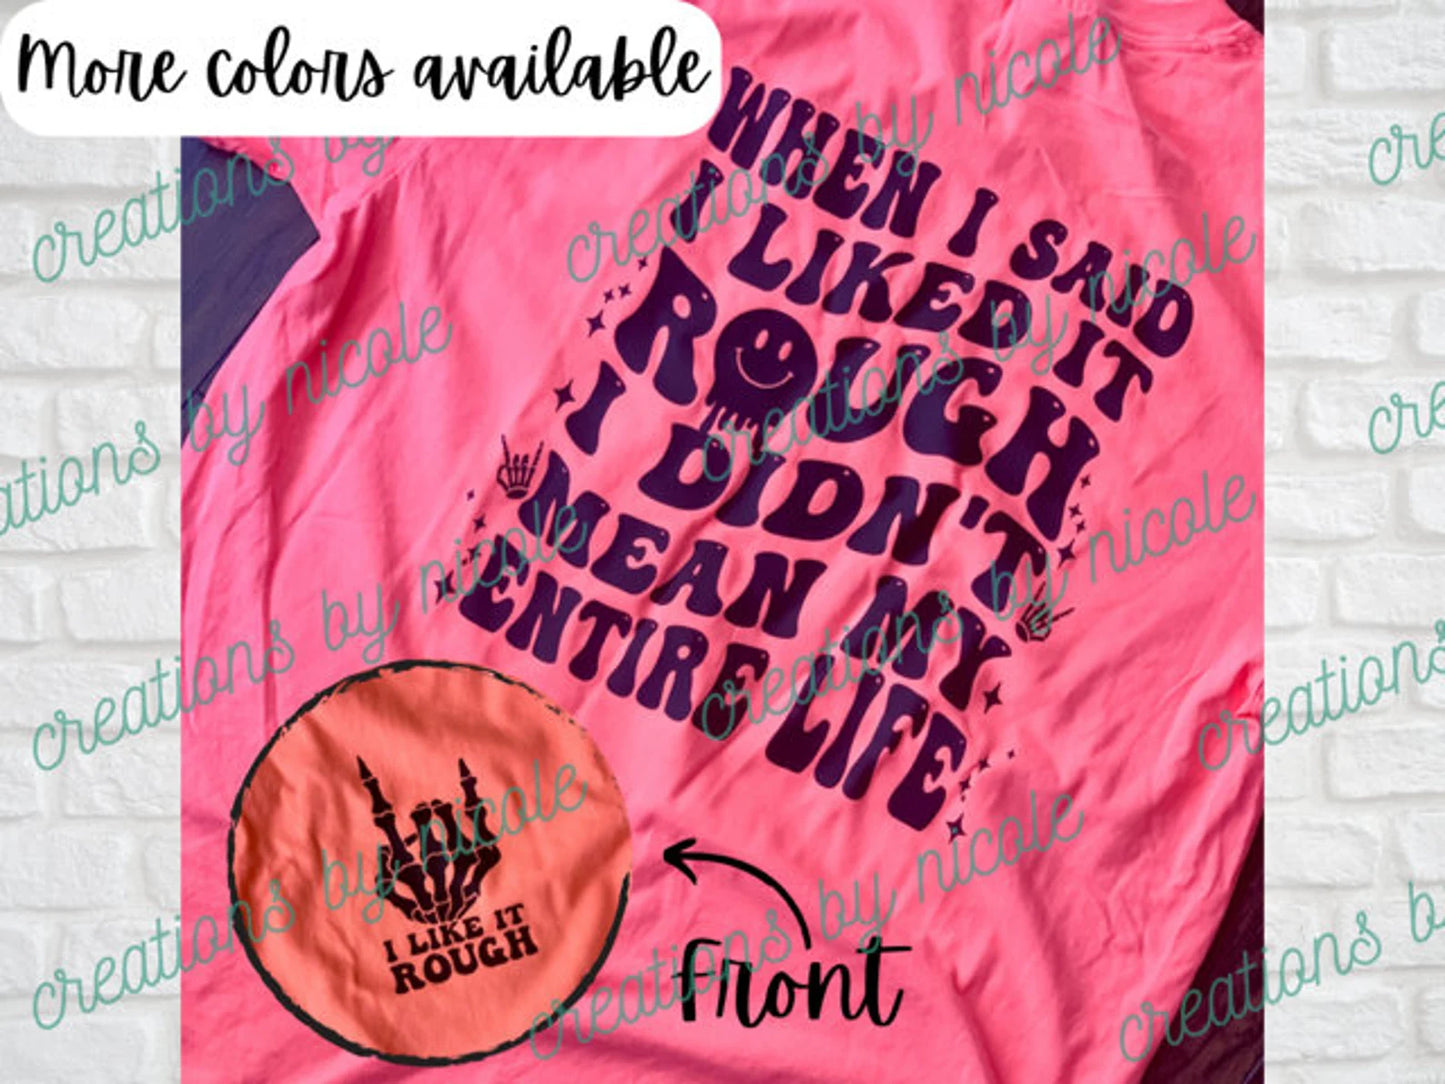 When I Said I Liked It Rough I Didn't Mean My Entire Life Shirt